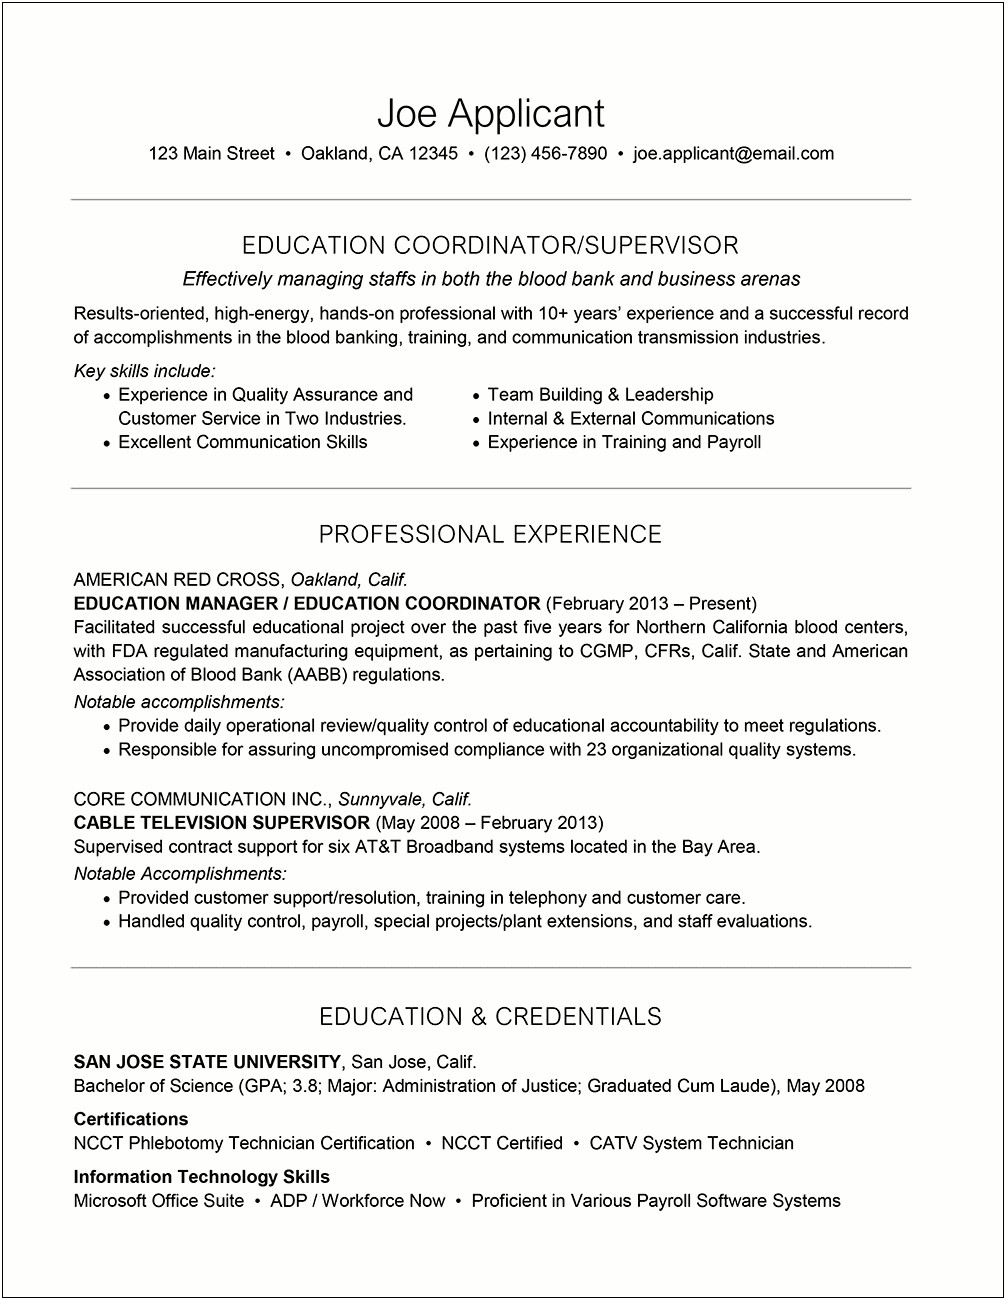 Chronological Resumes With Greater Than 10 Years Experience